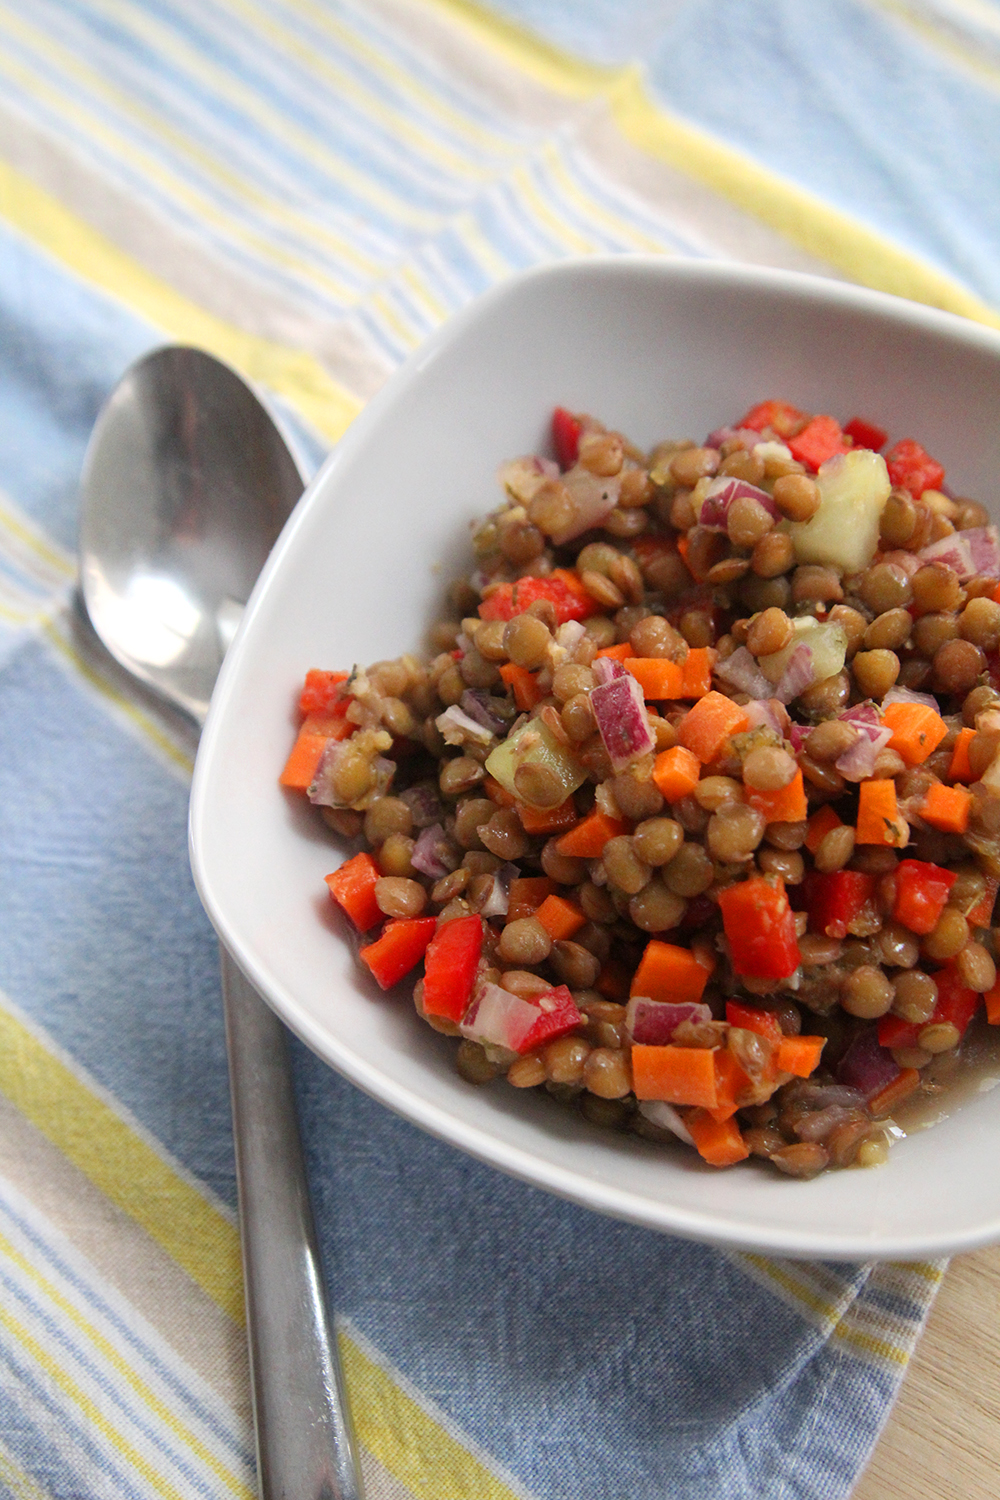 A bowl filled with cold lentil salad — lentils, red onions, cucumbers, red peppers and carrots — sits on a blue and yellow striped fabric with a spoon nearby.